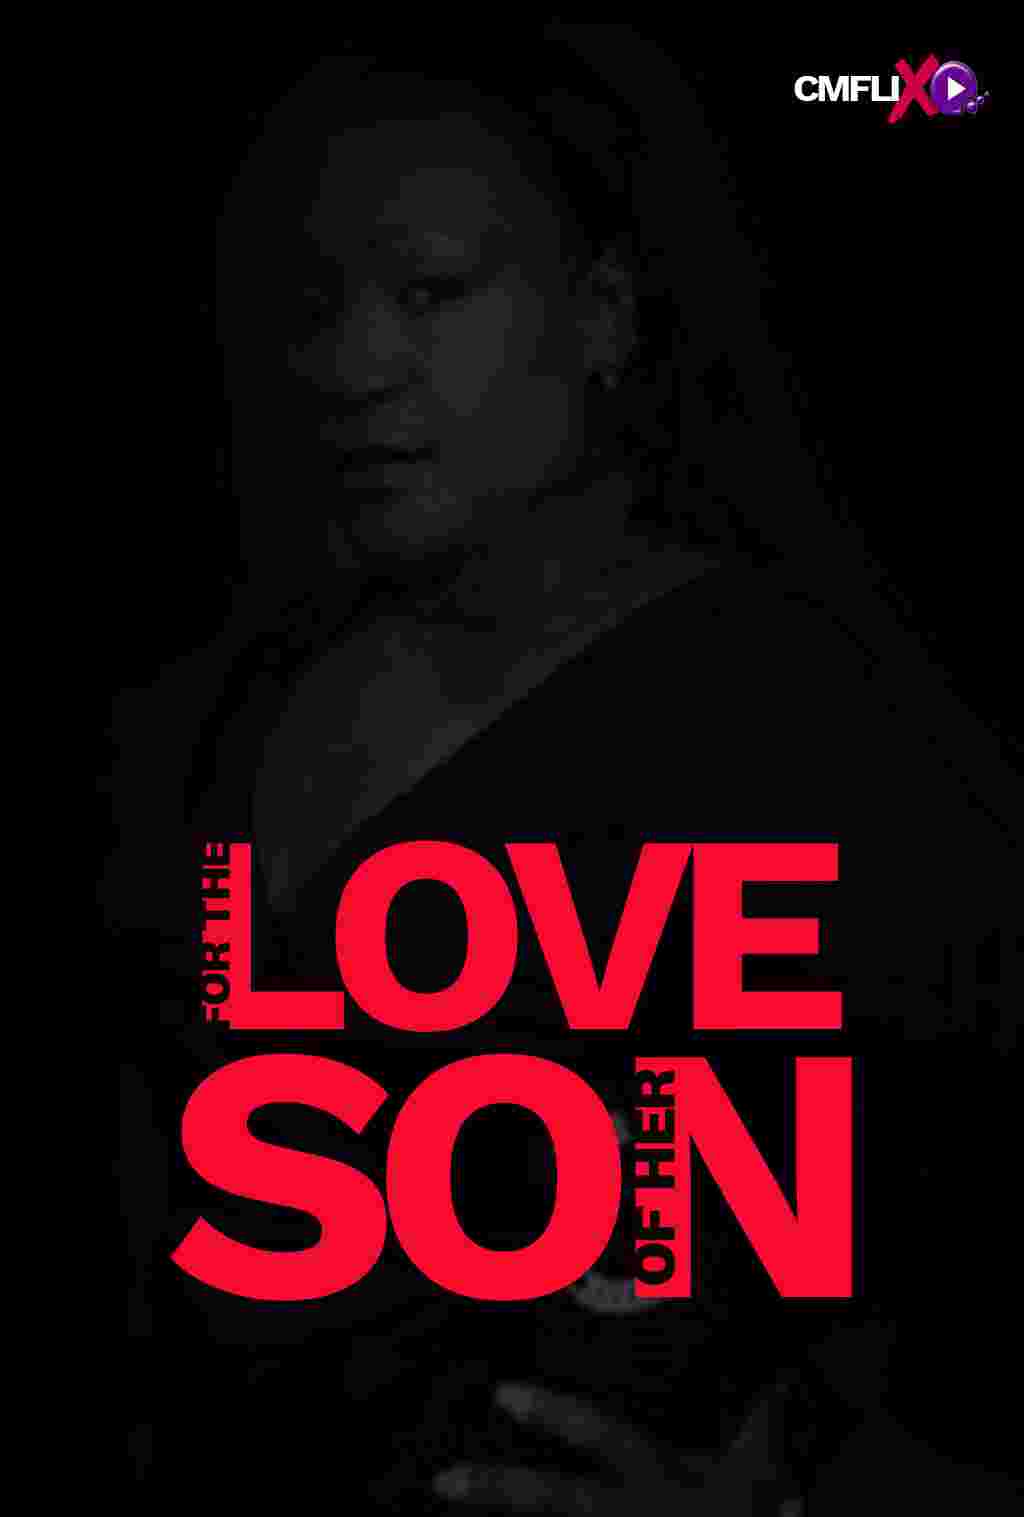 FOR THE LOVE OF HER SON - FLORENCE NDUTA